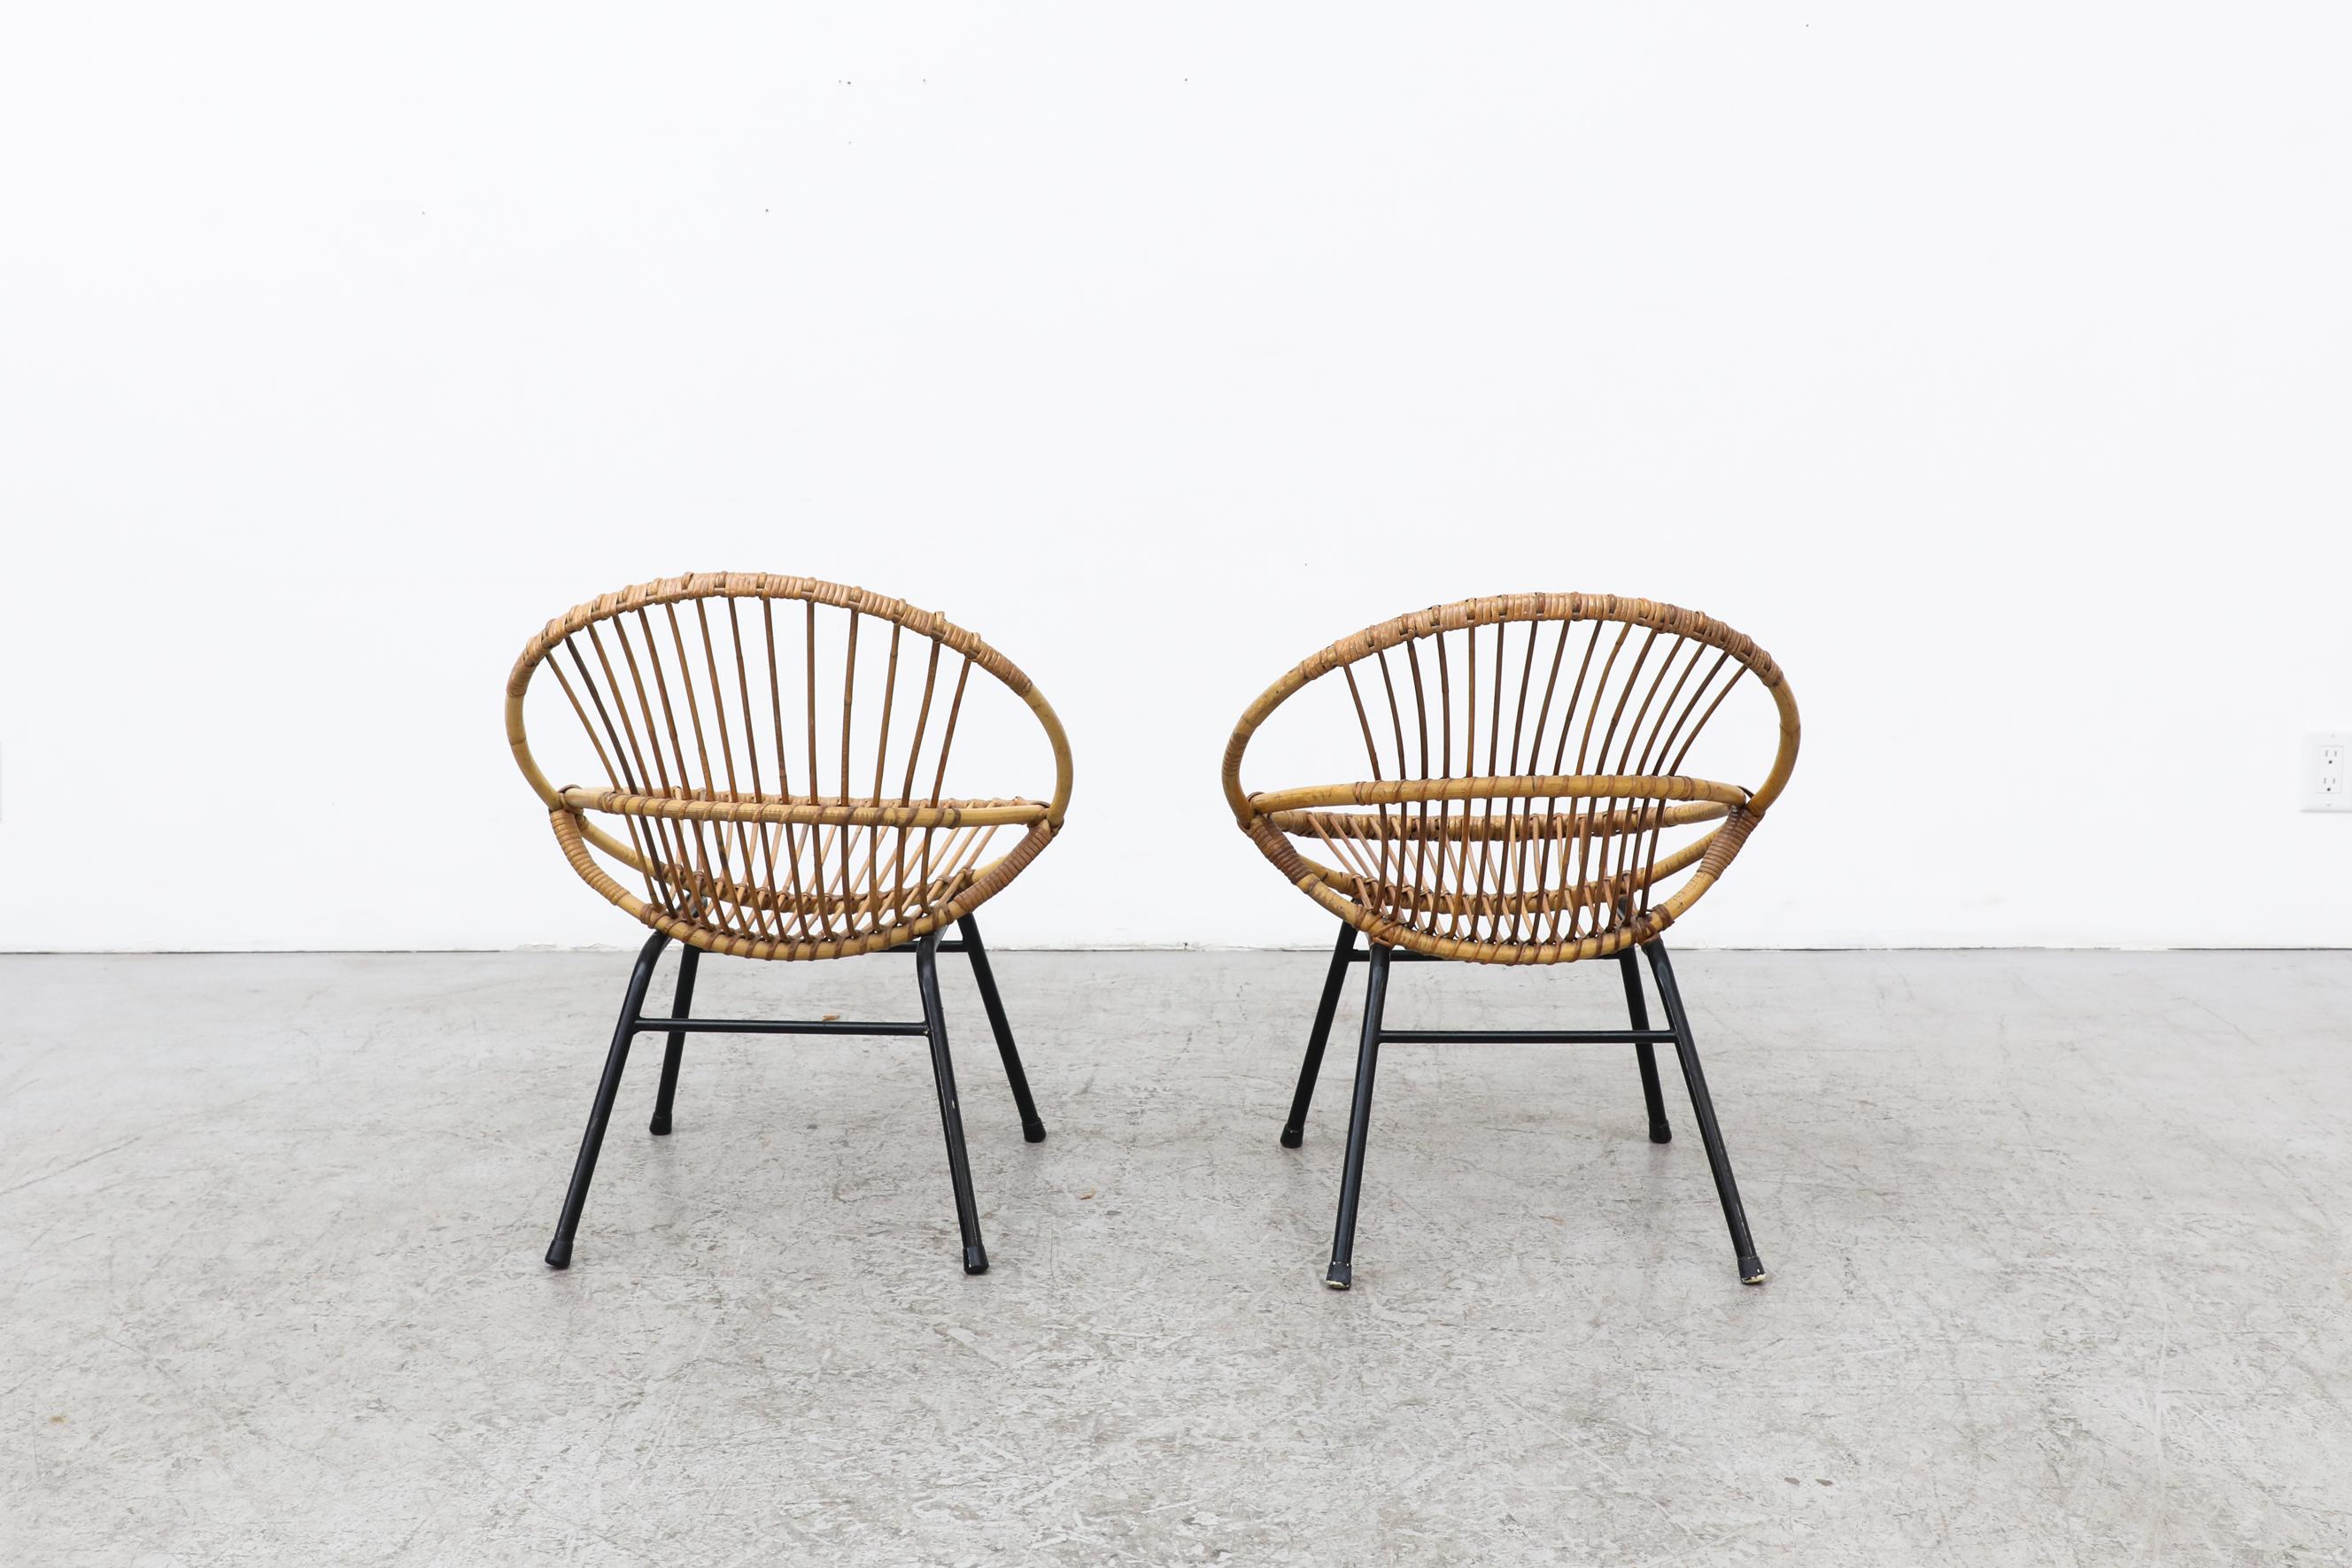 Late 20th Century Pair of Rohe Noordwolde Bamboo Hoop Chairs with Black Tubular Legs